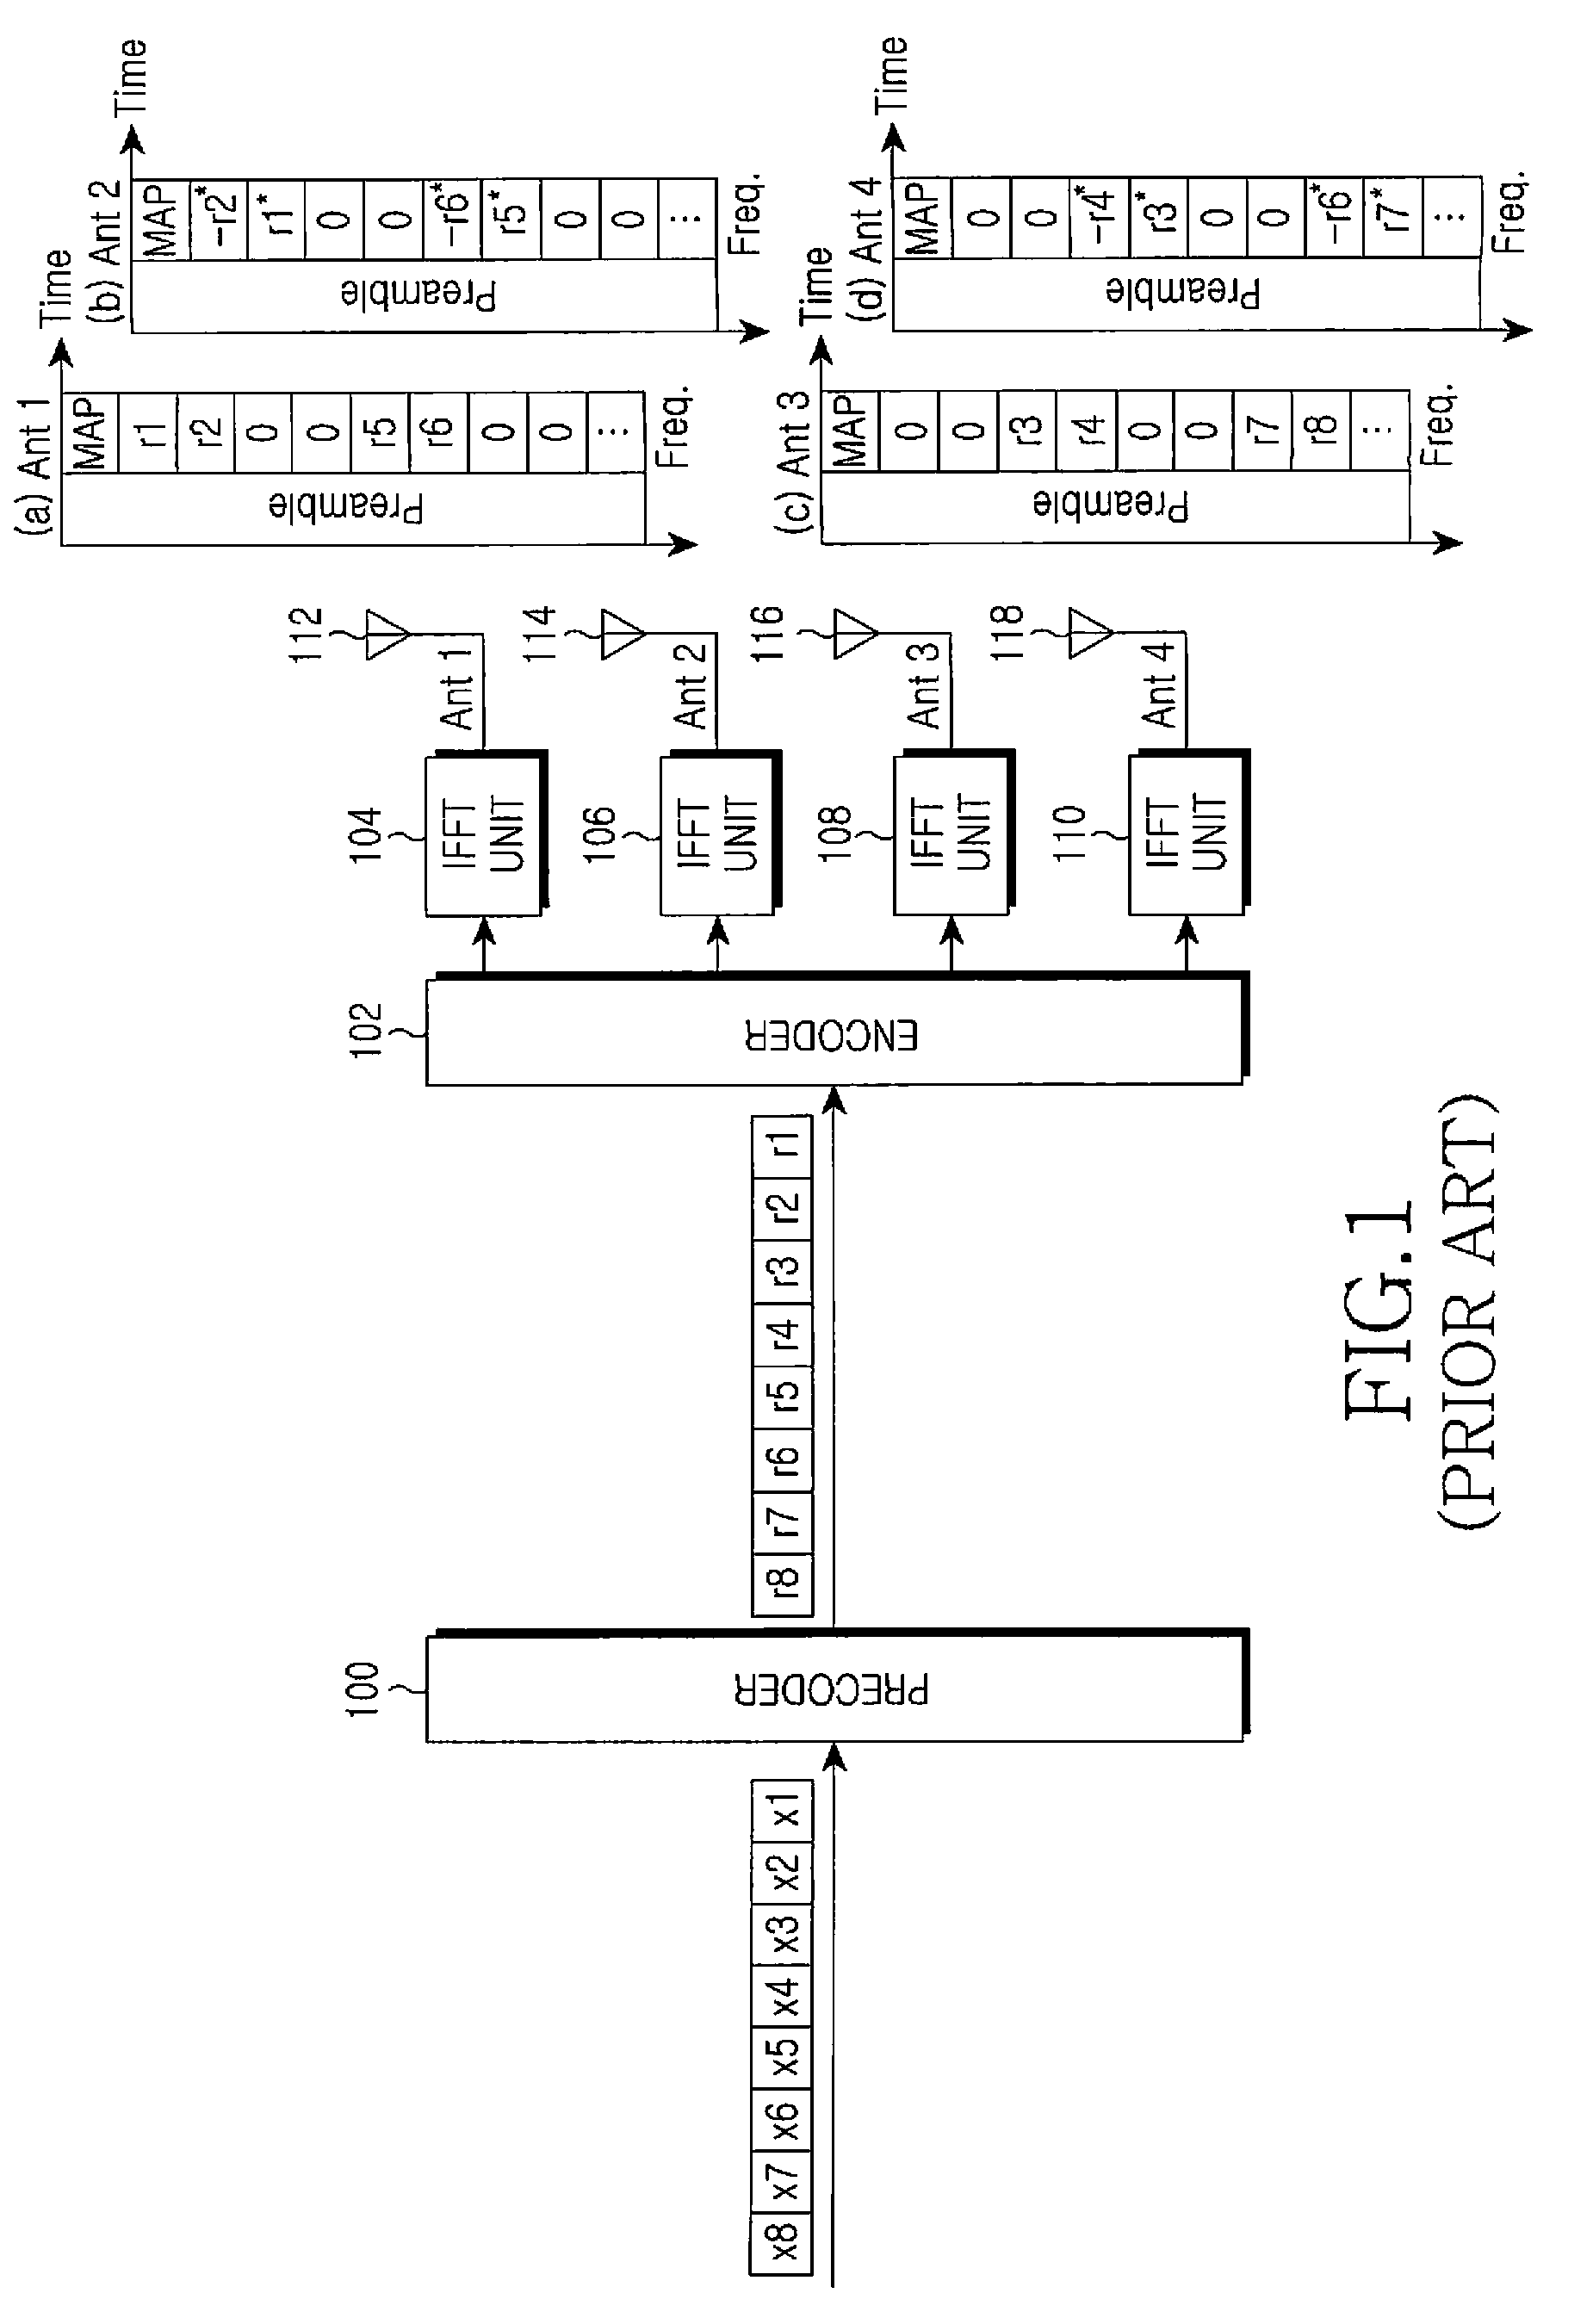 Apparatus and method for minimizing a PAPR in an OFDM communication system